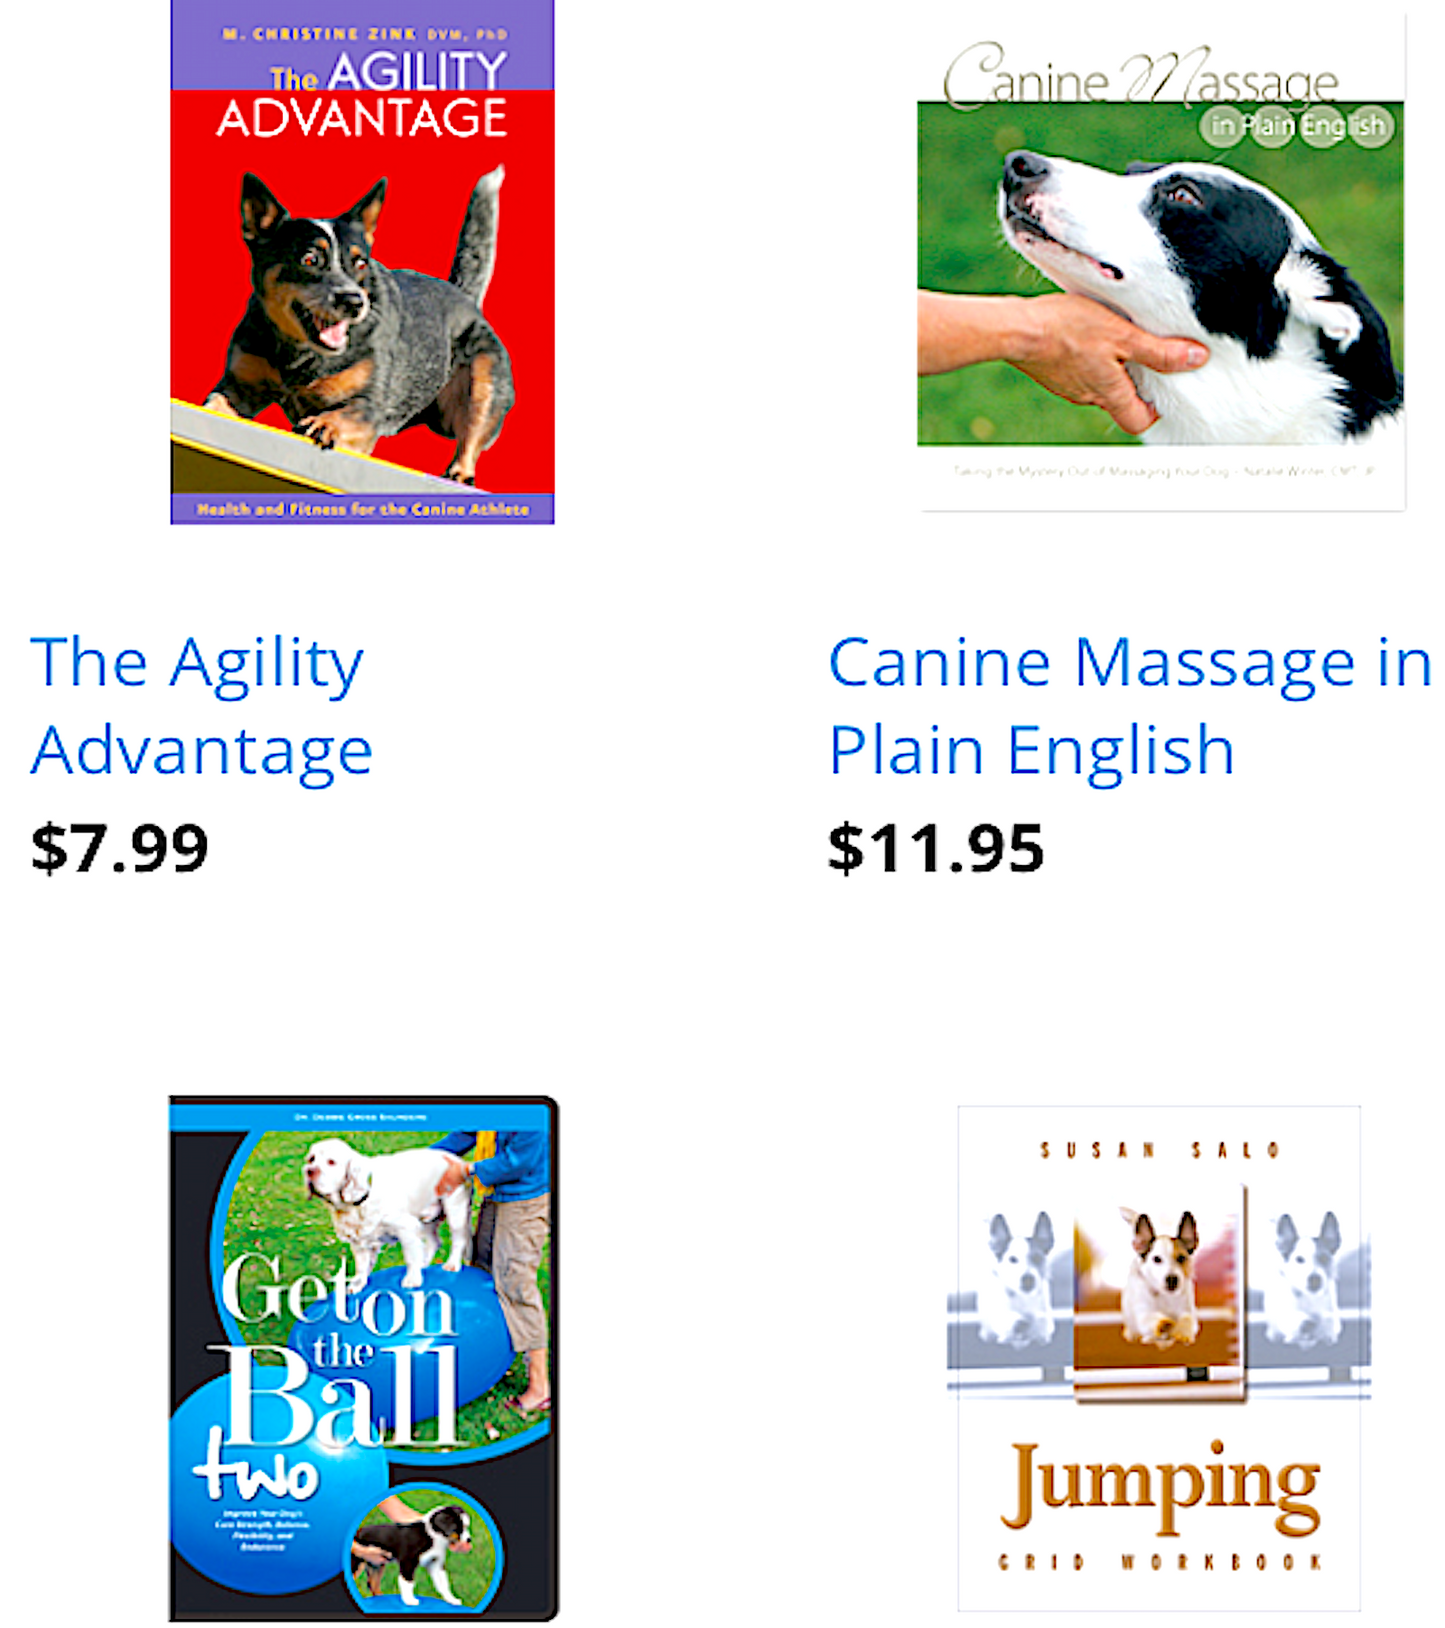 FITNESS & HEALTH BOOKS & DVDs: including training, agility, massage and more - Vital Vet